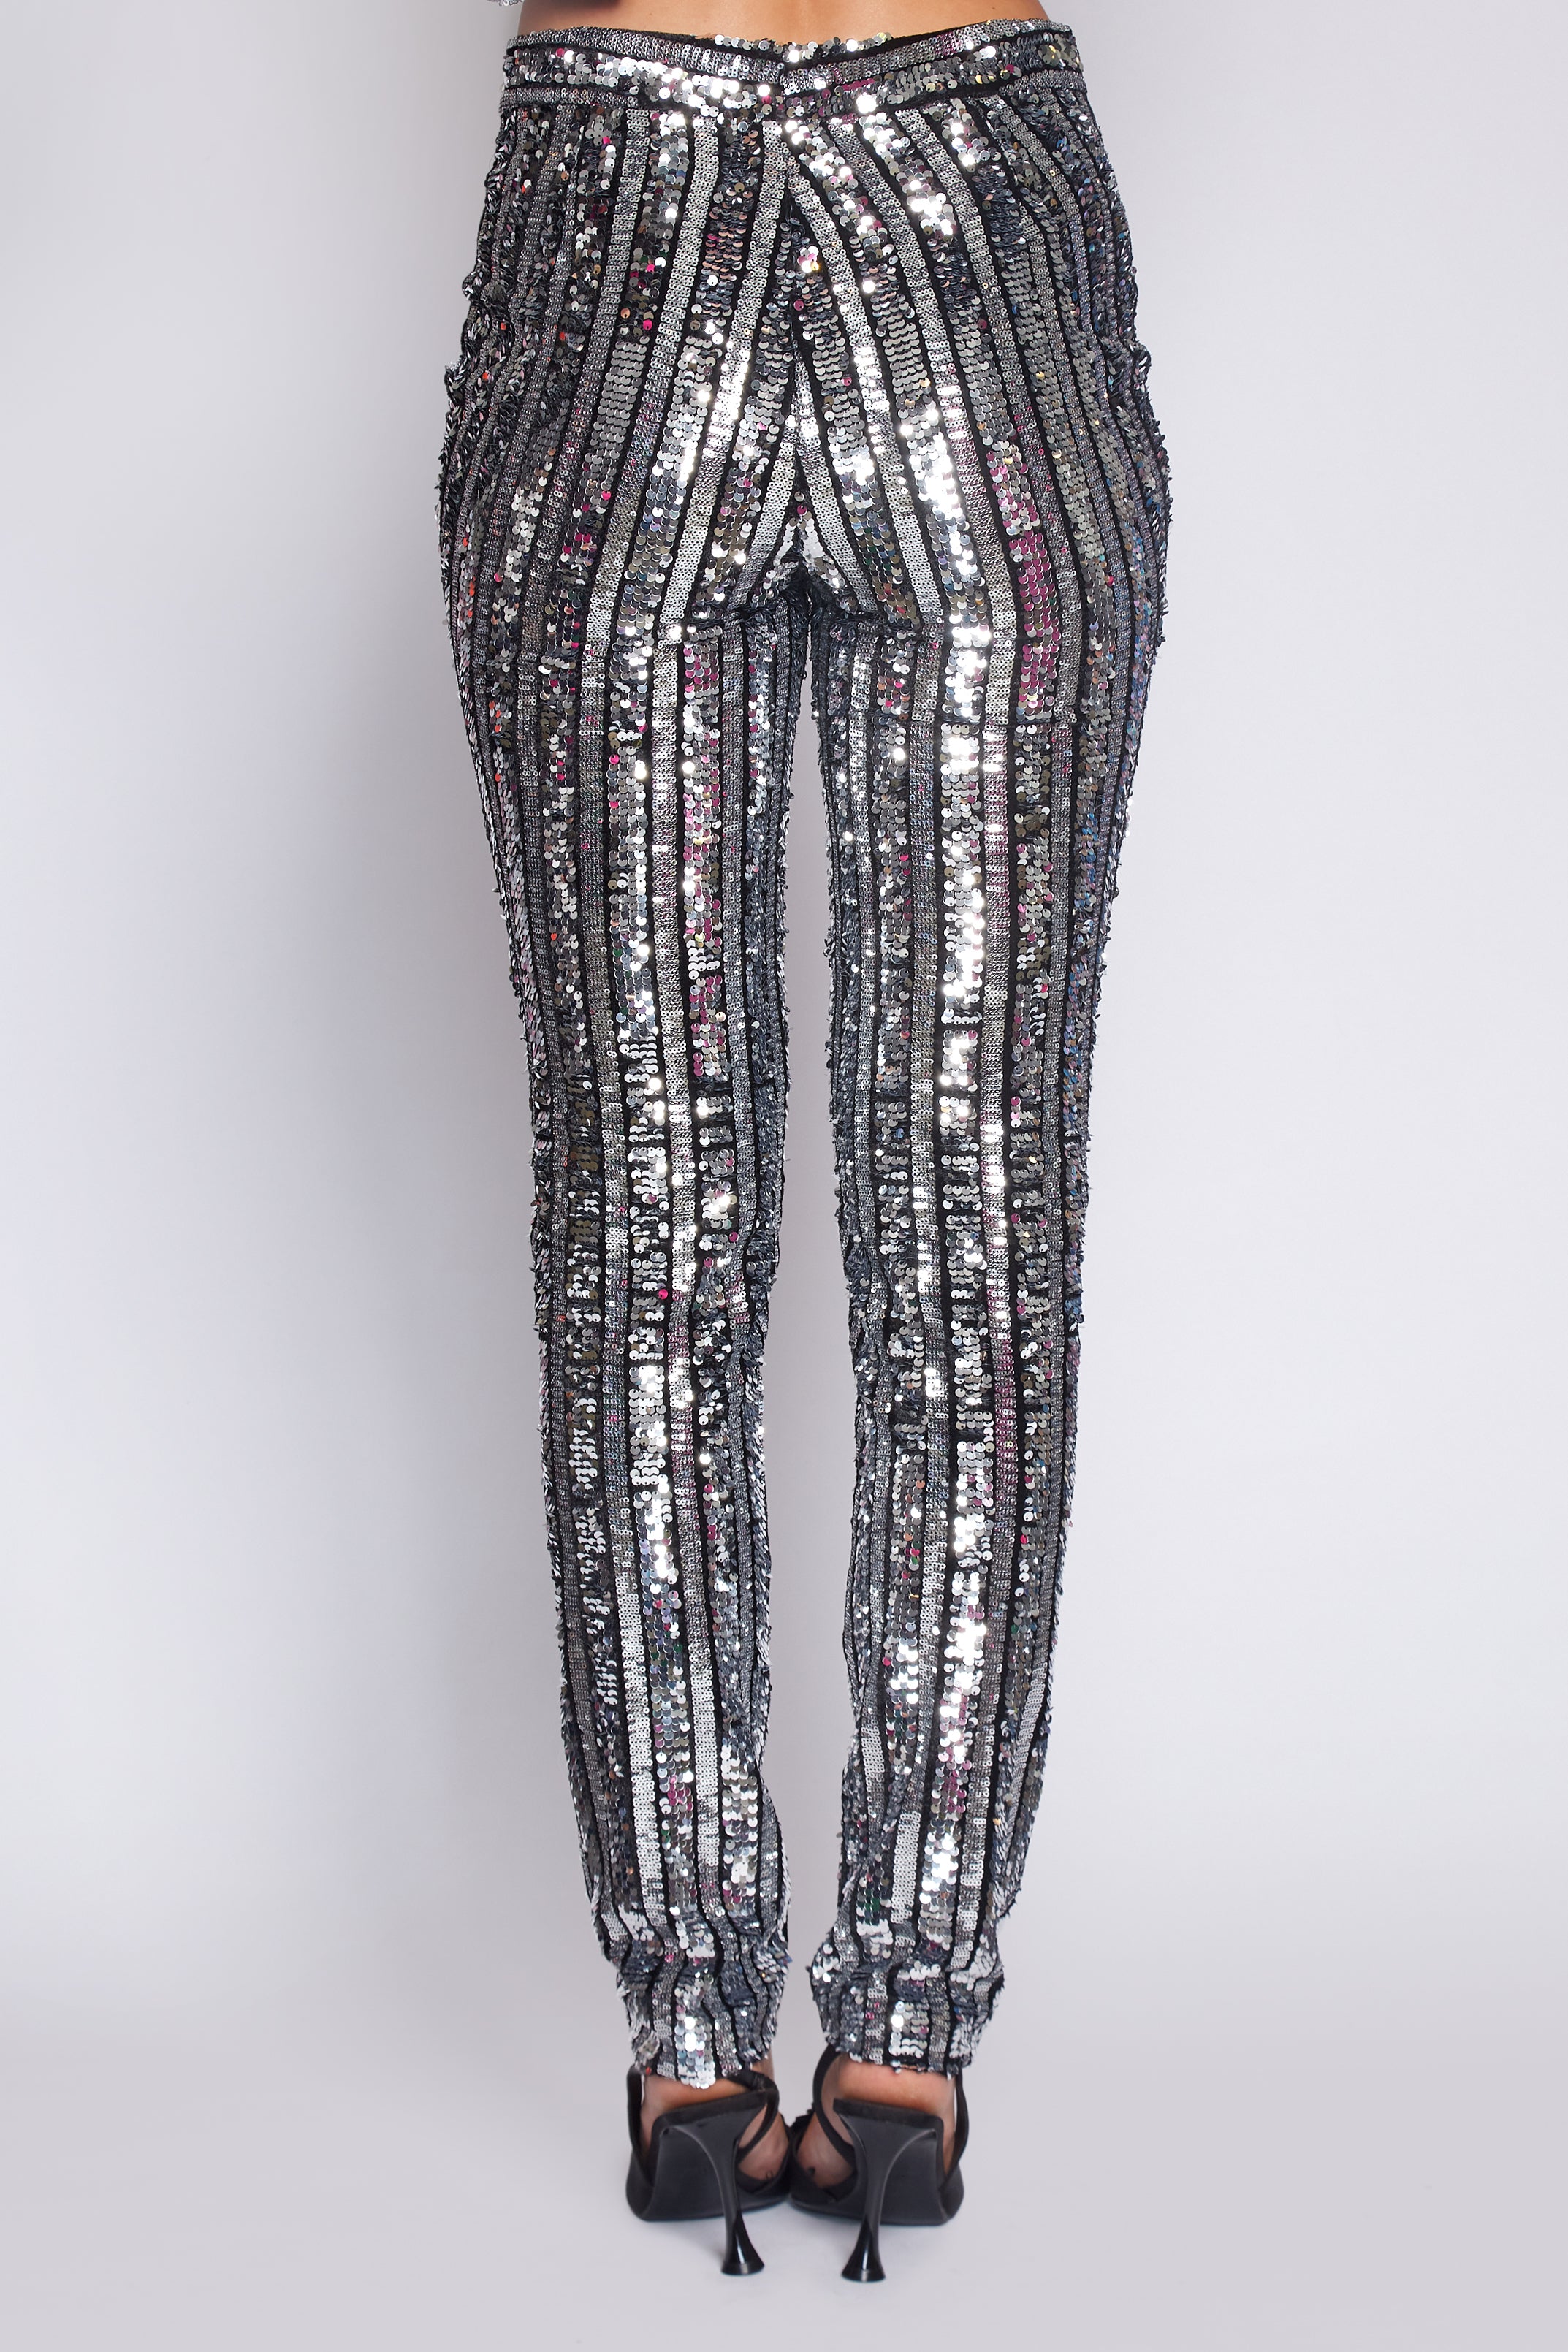 Black and Silver Sequin Suit